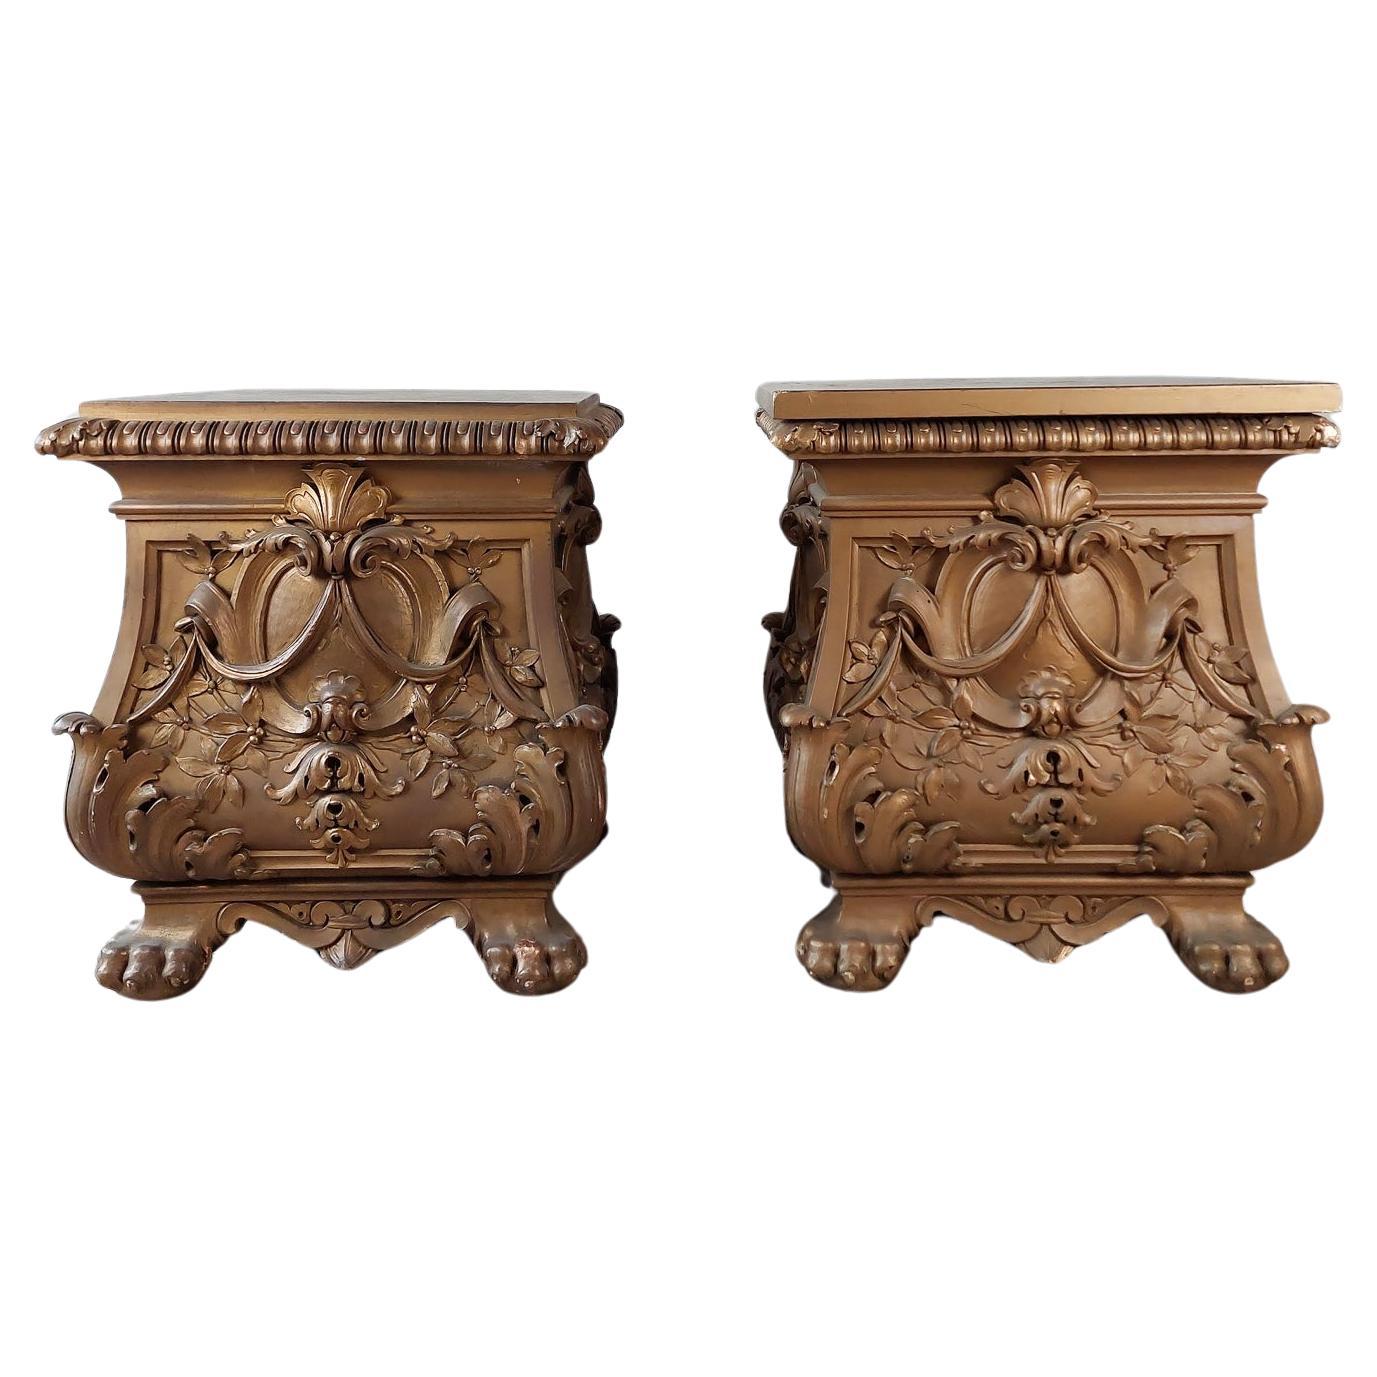 Pair of Antique Gold Patinated Wooden Pedestals